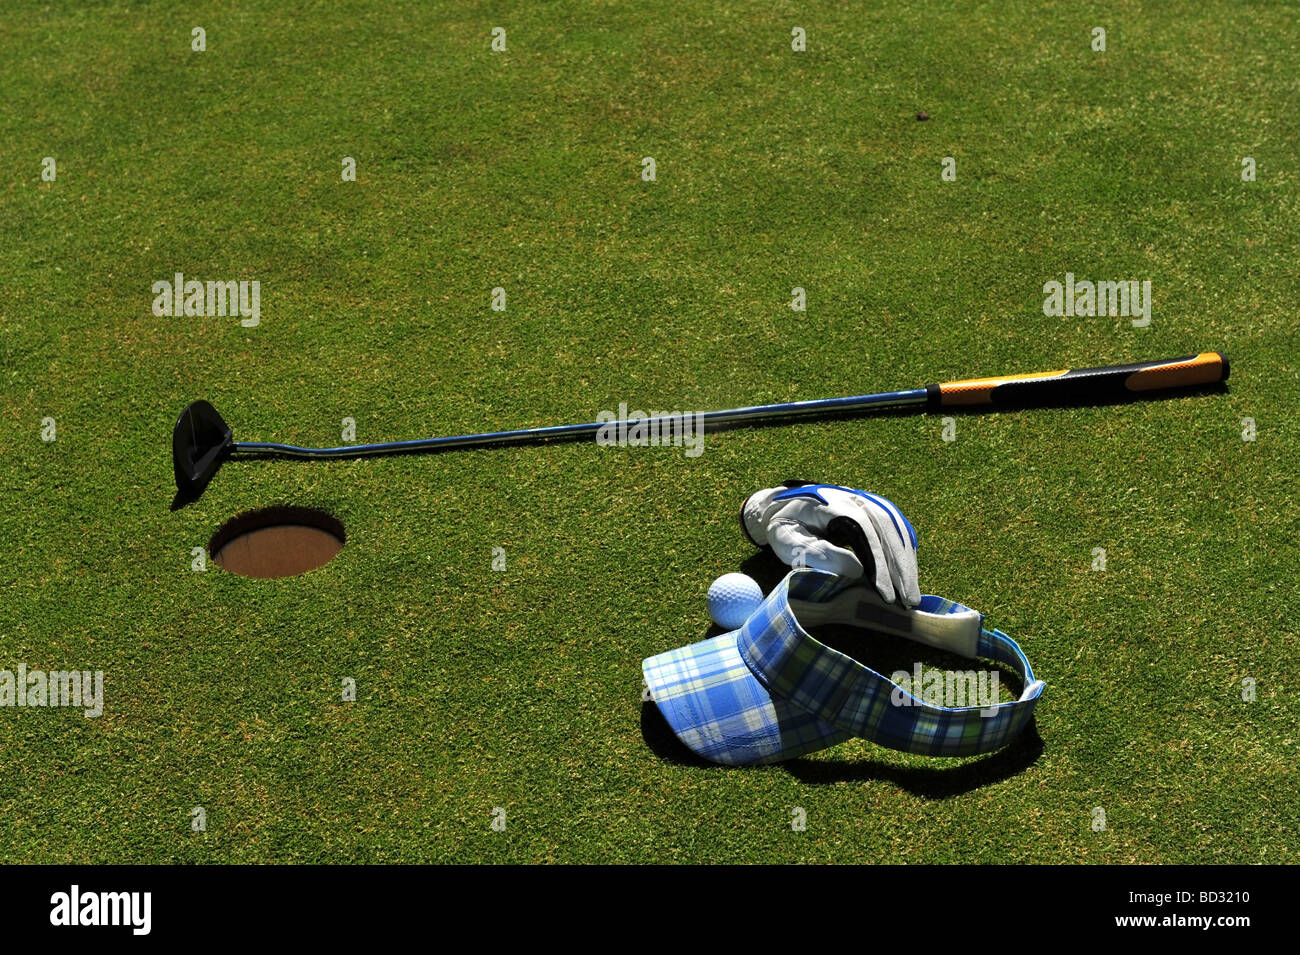 Golf course putting green with a putter, golf ball, ladies cloth sun visor and leather golfing glove Stock Photo